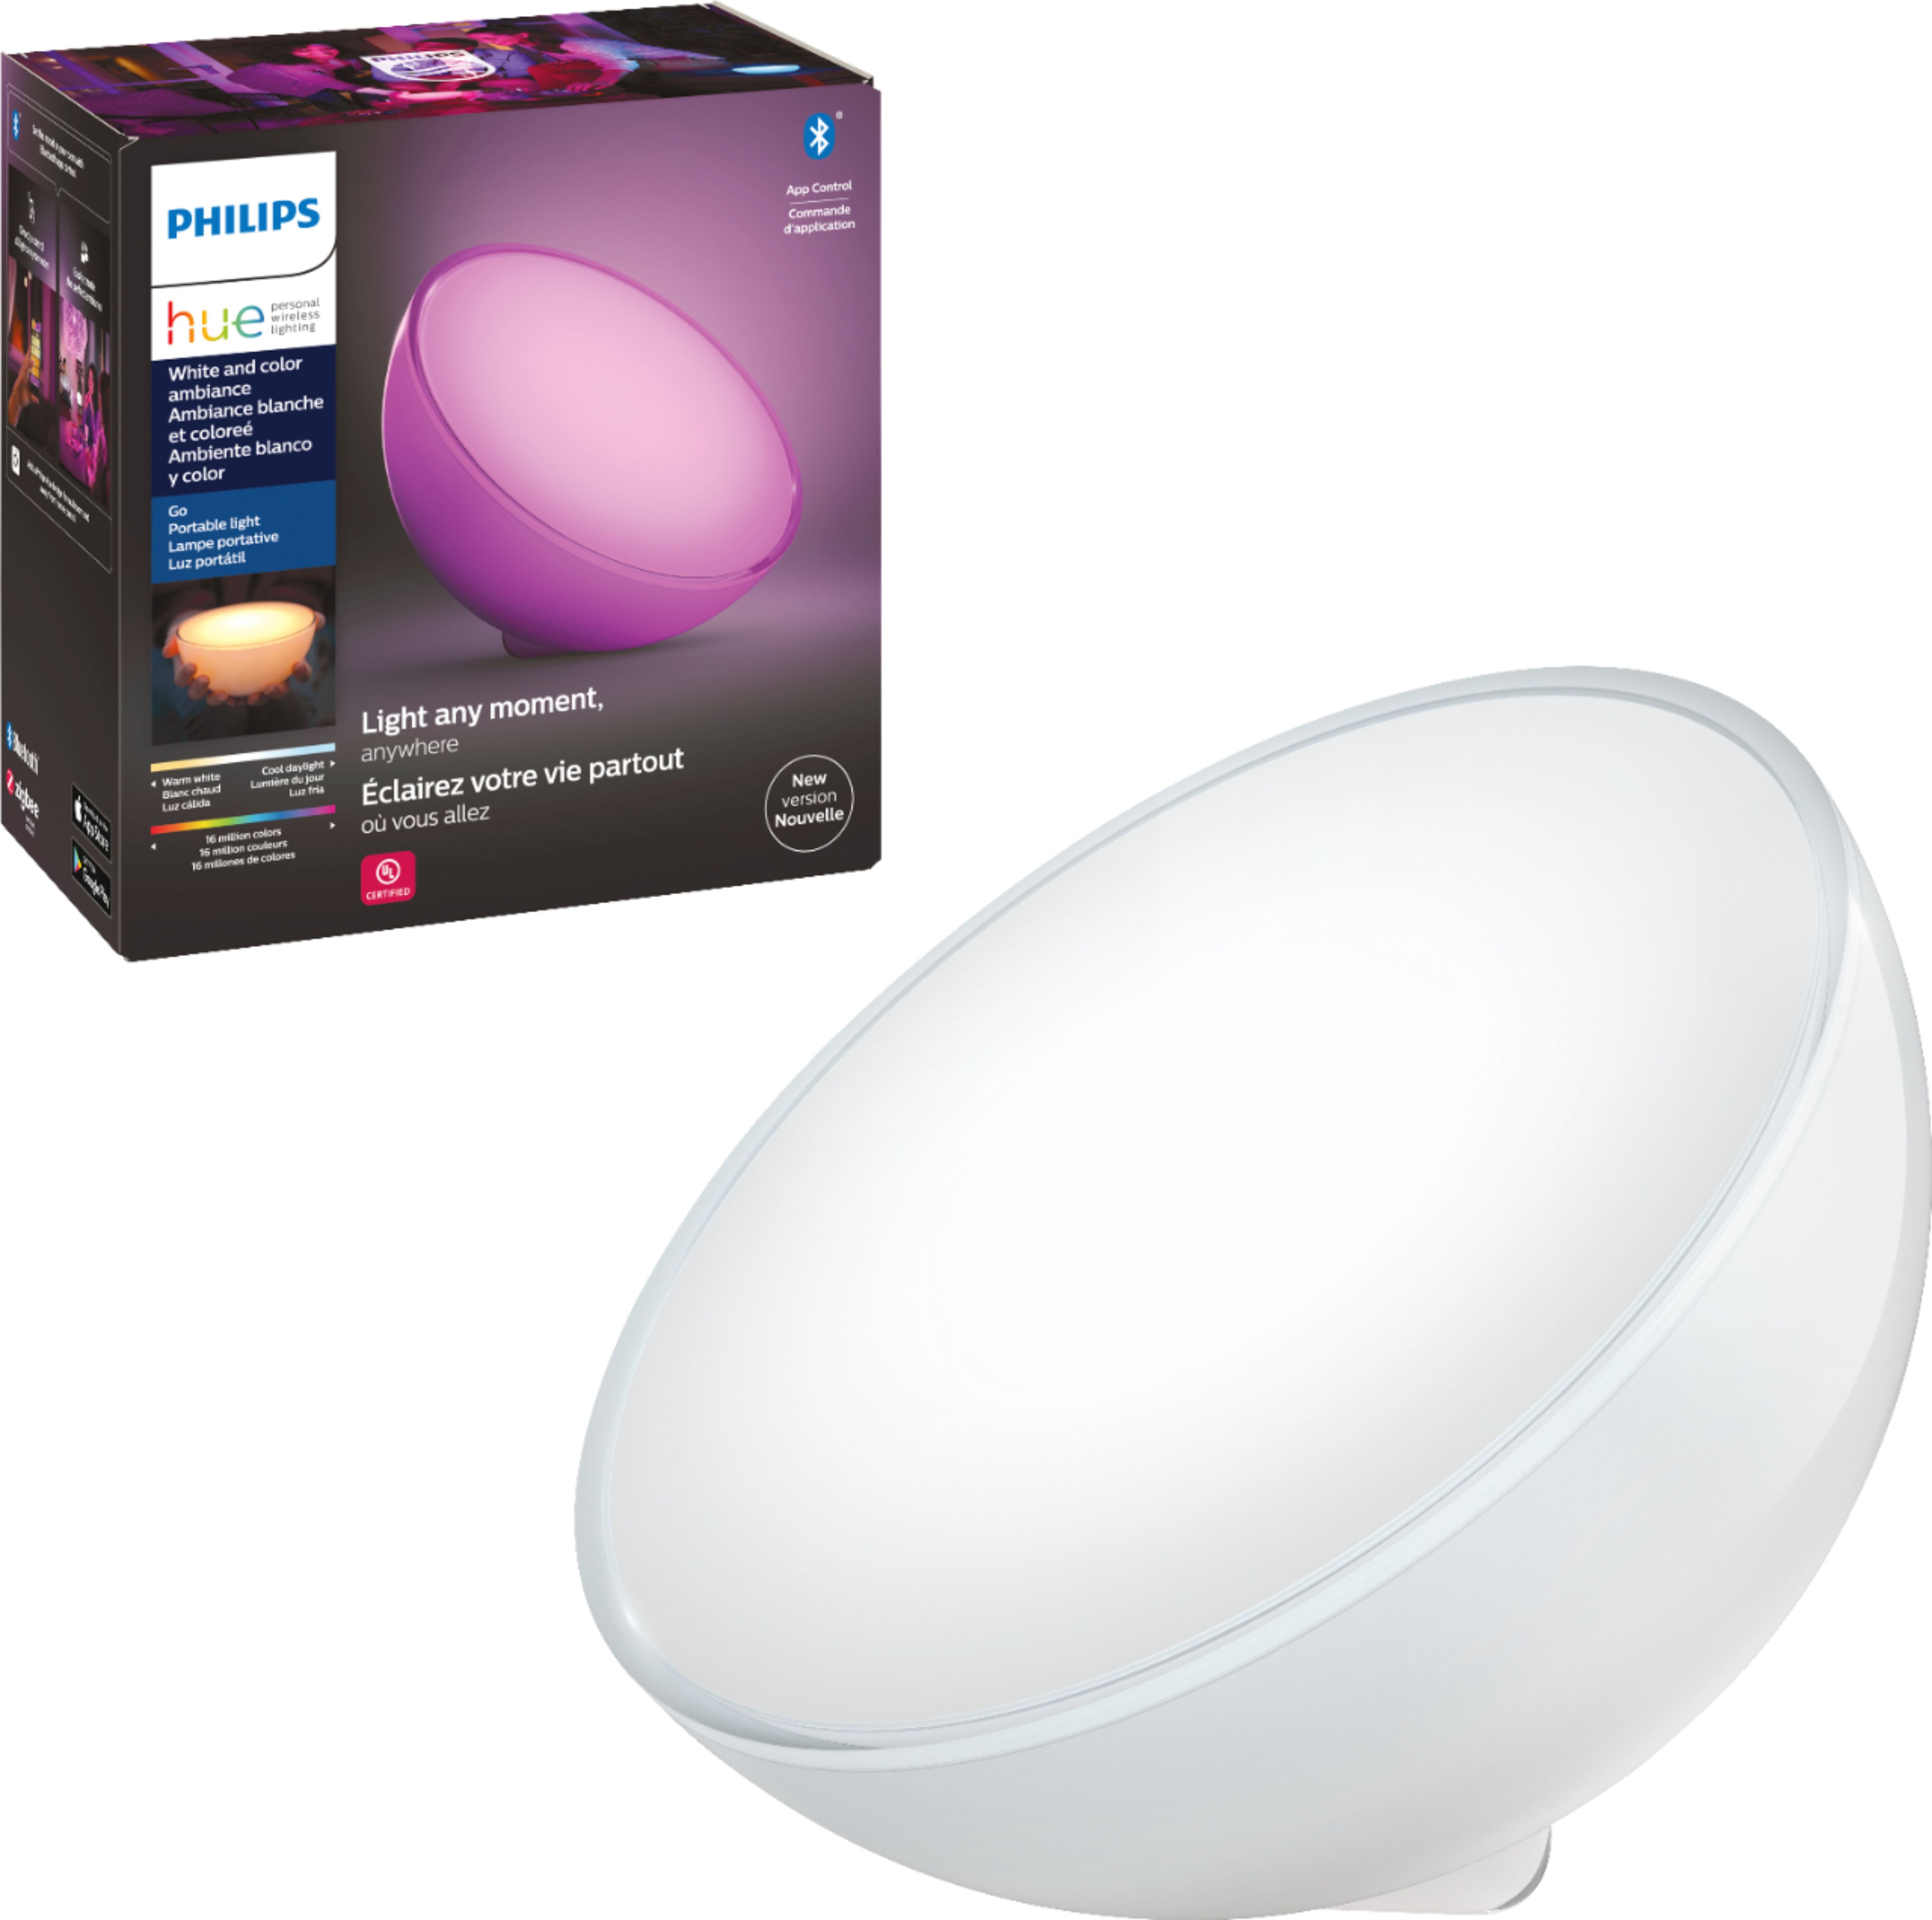 Philips Hue White & Color Ambiance Go Table White 7602031 - Best